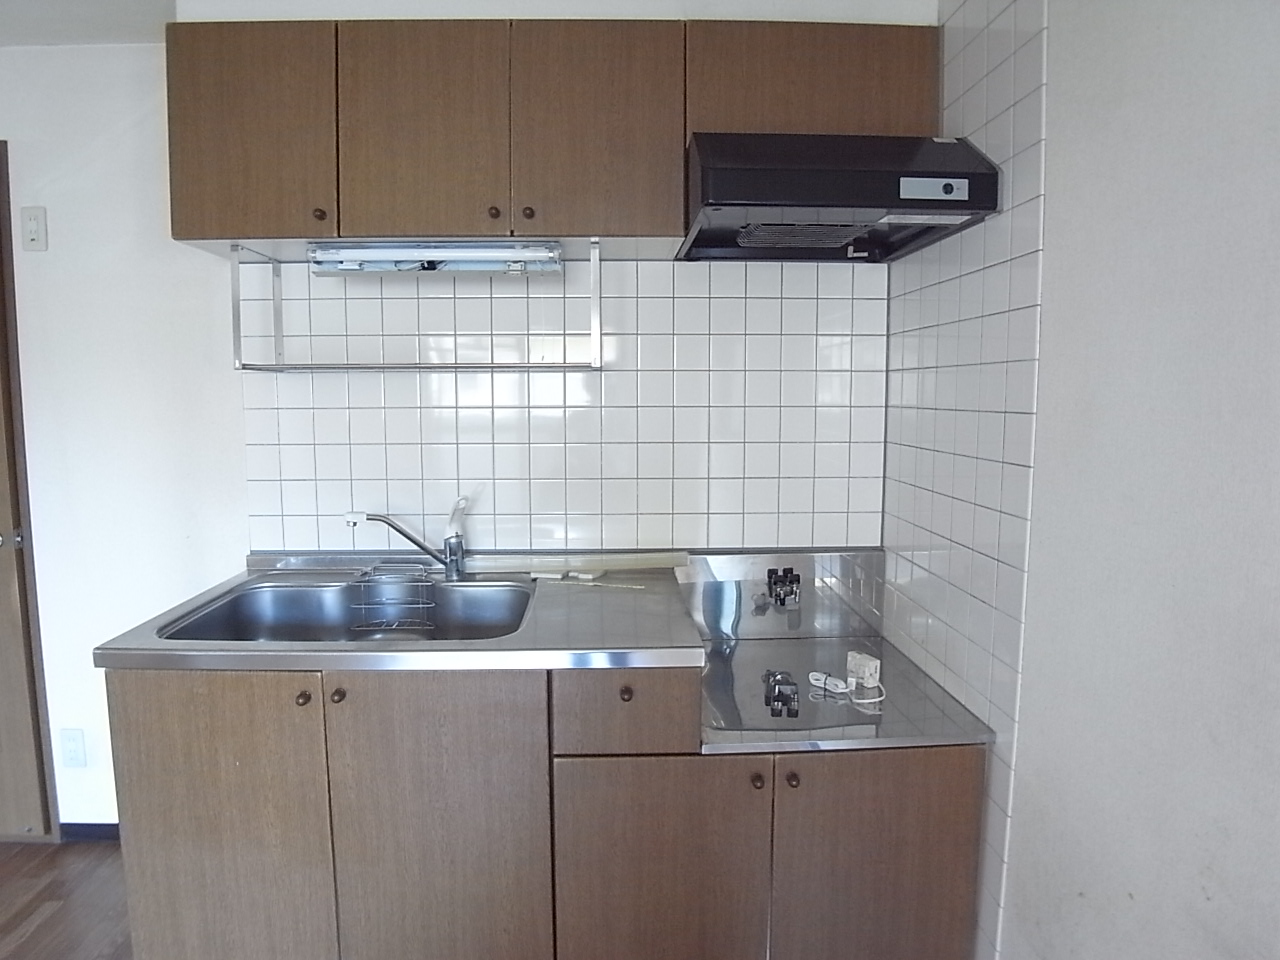 Kitchen. Two-burner stove can be installed ^^